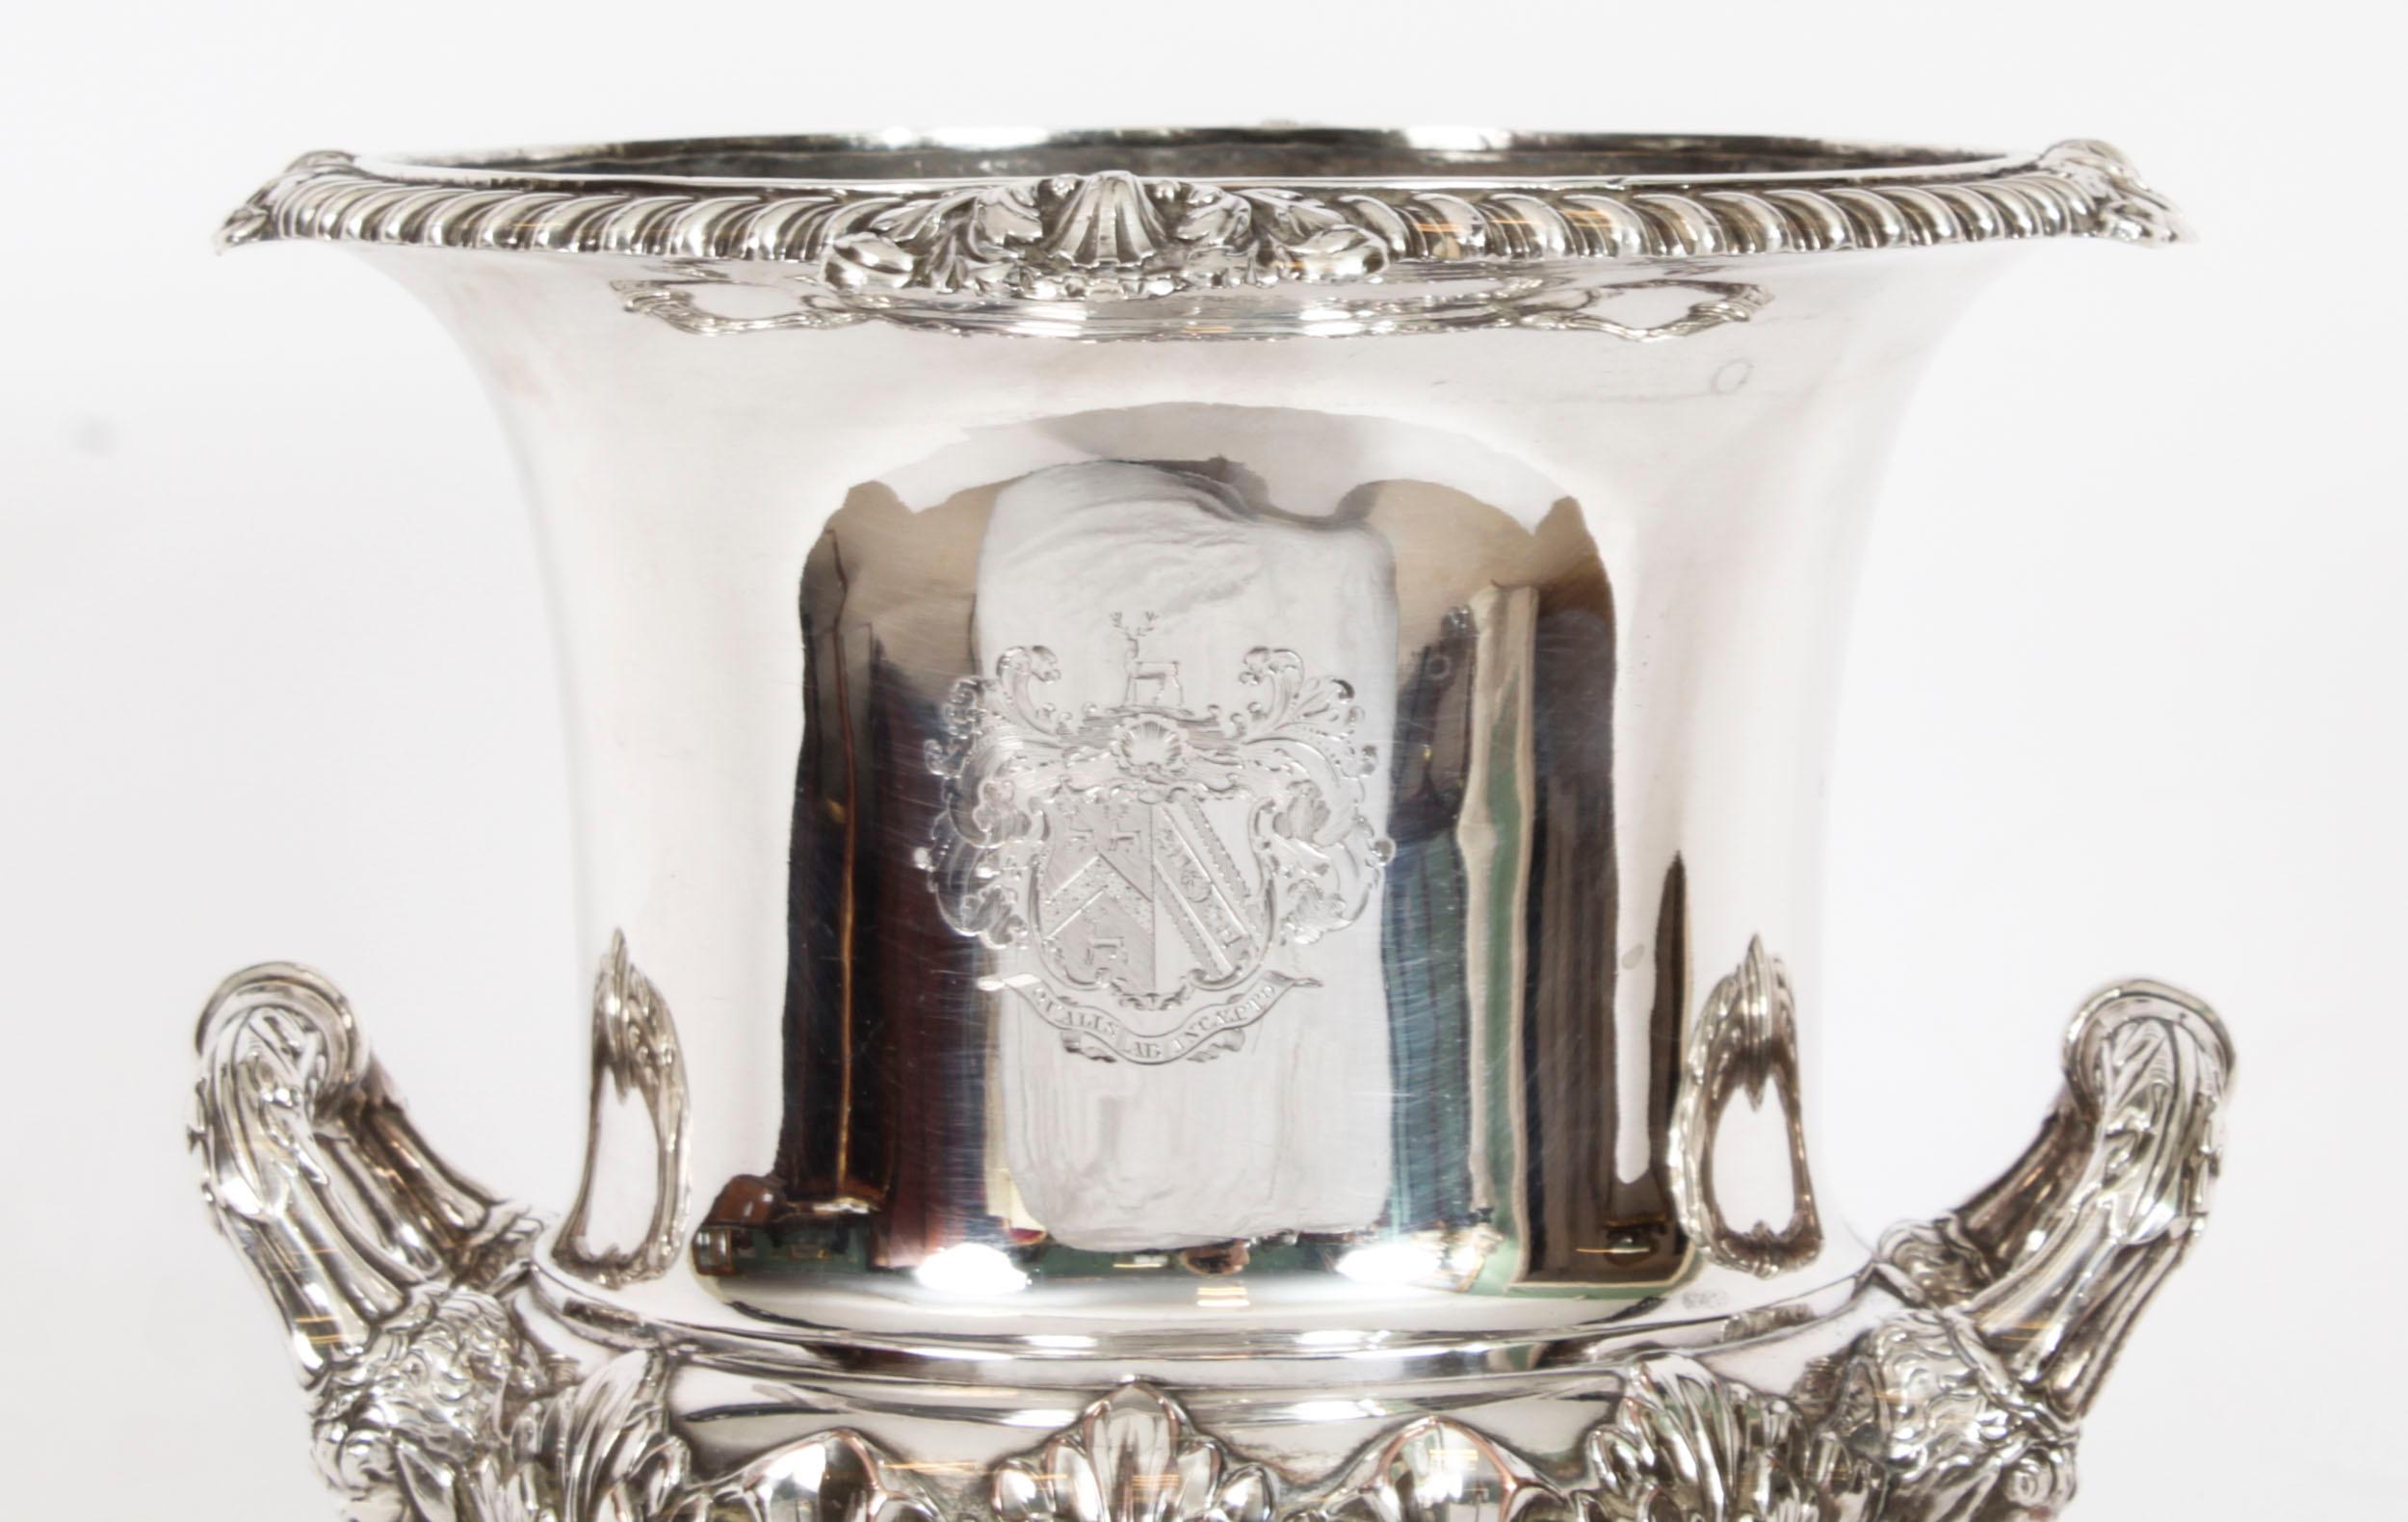 This is an elegant antique English Old Sheffield plate silver on copper ice bucket or wine cooler, circa 1790 in date, and bearing the sunburst makers marks of the world renowned silversmith Matthew Boulton.

The cooler is of campana baluster form